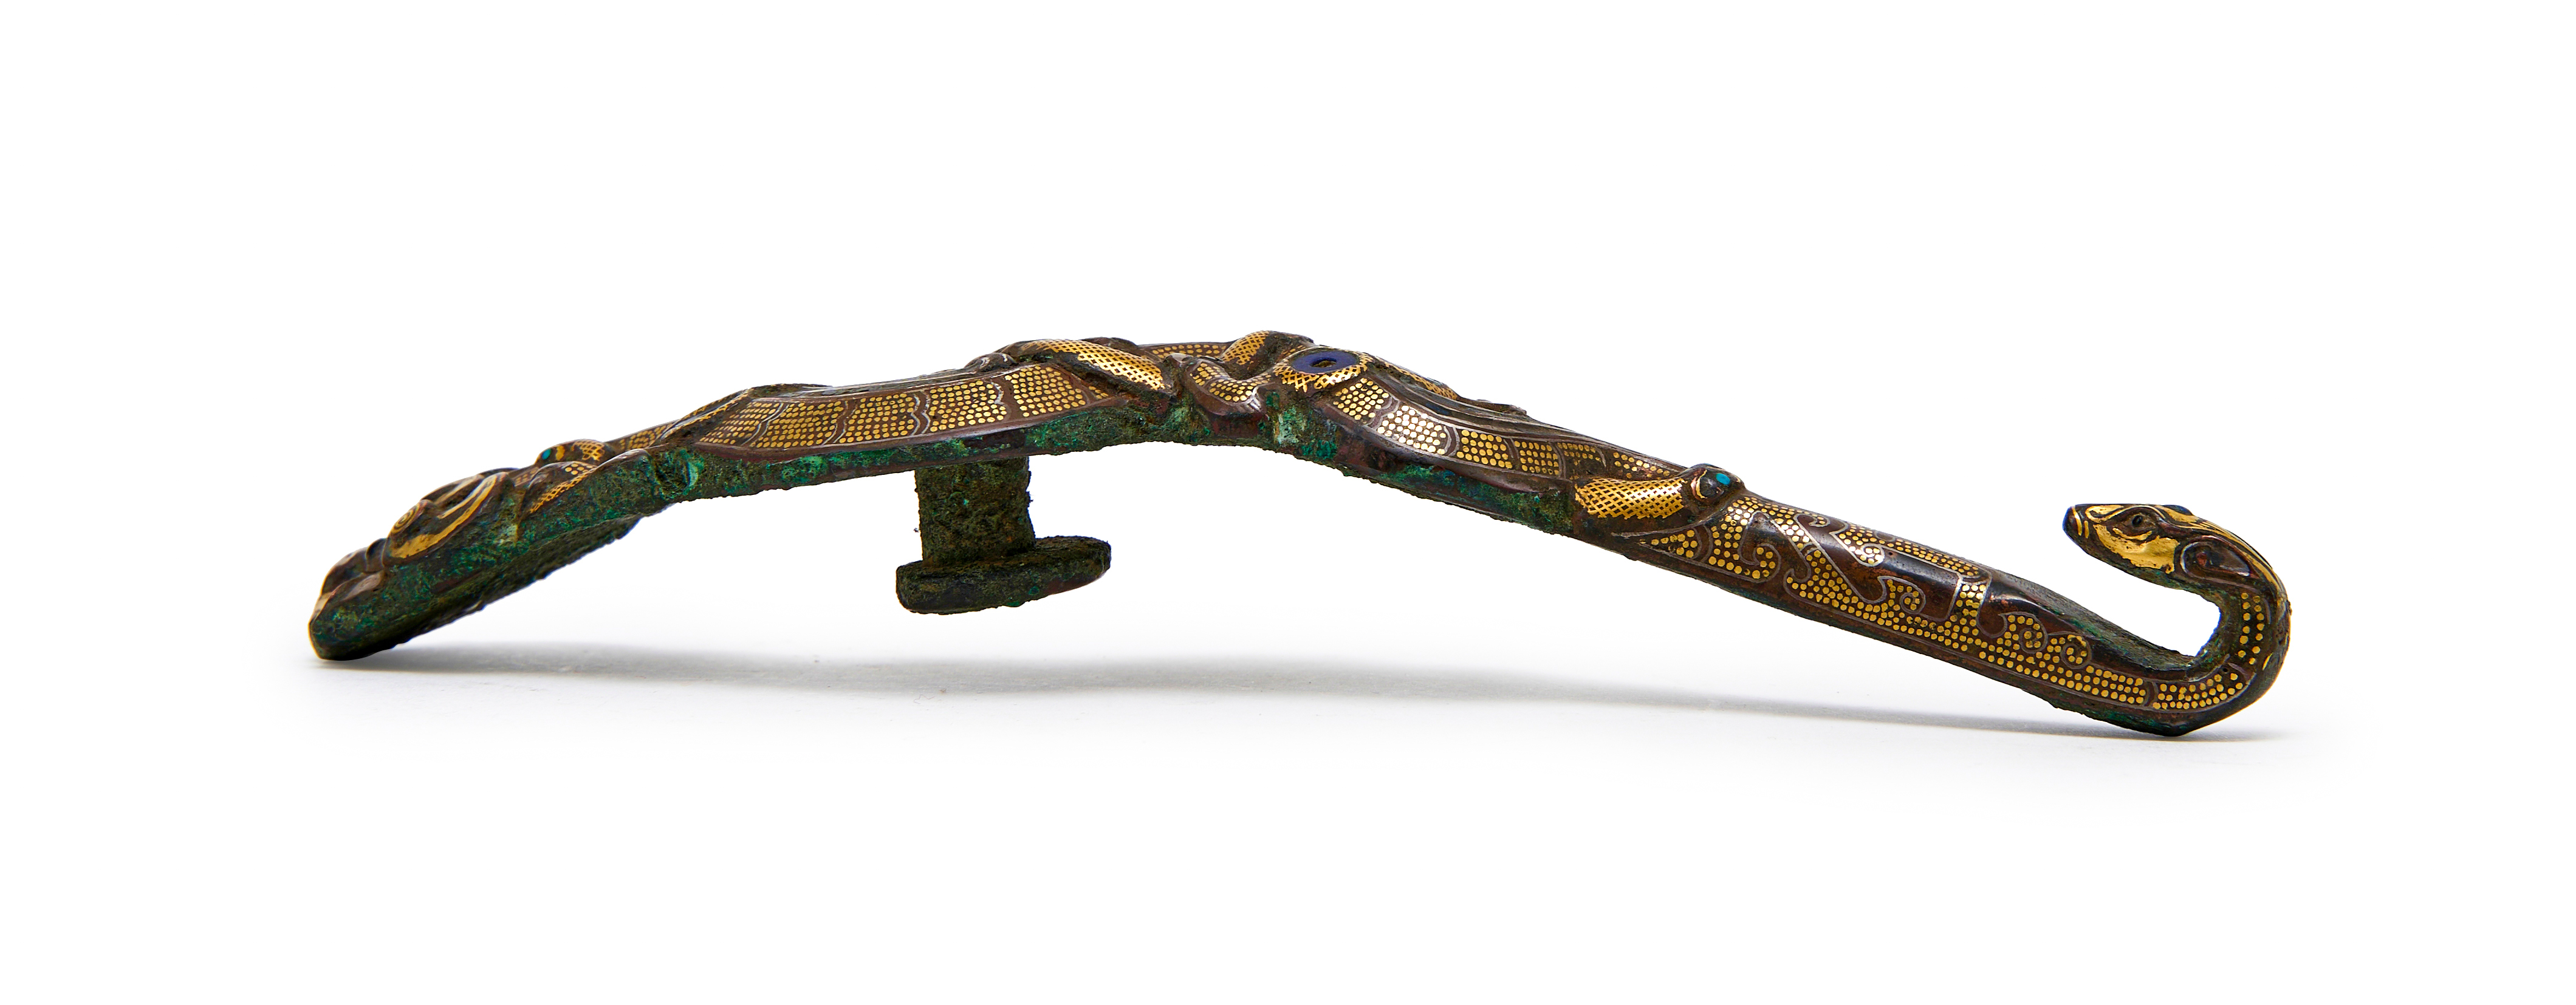 A TURQUOISE AND GOLD-INLAID BRONZE BELT HOOK WARRING STATES PERIOD, 4TH-3RD CENTURY BC - Image 8 of 9